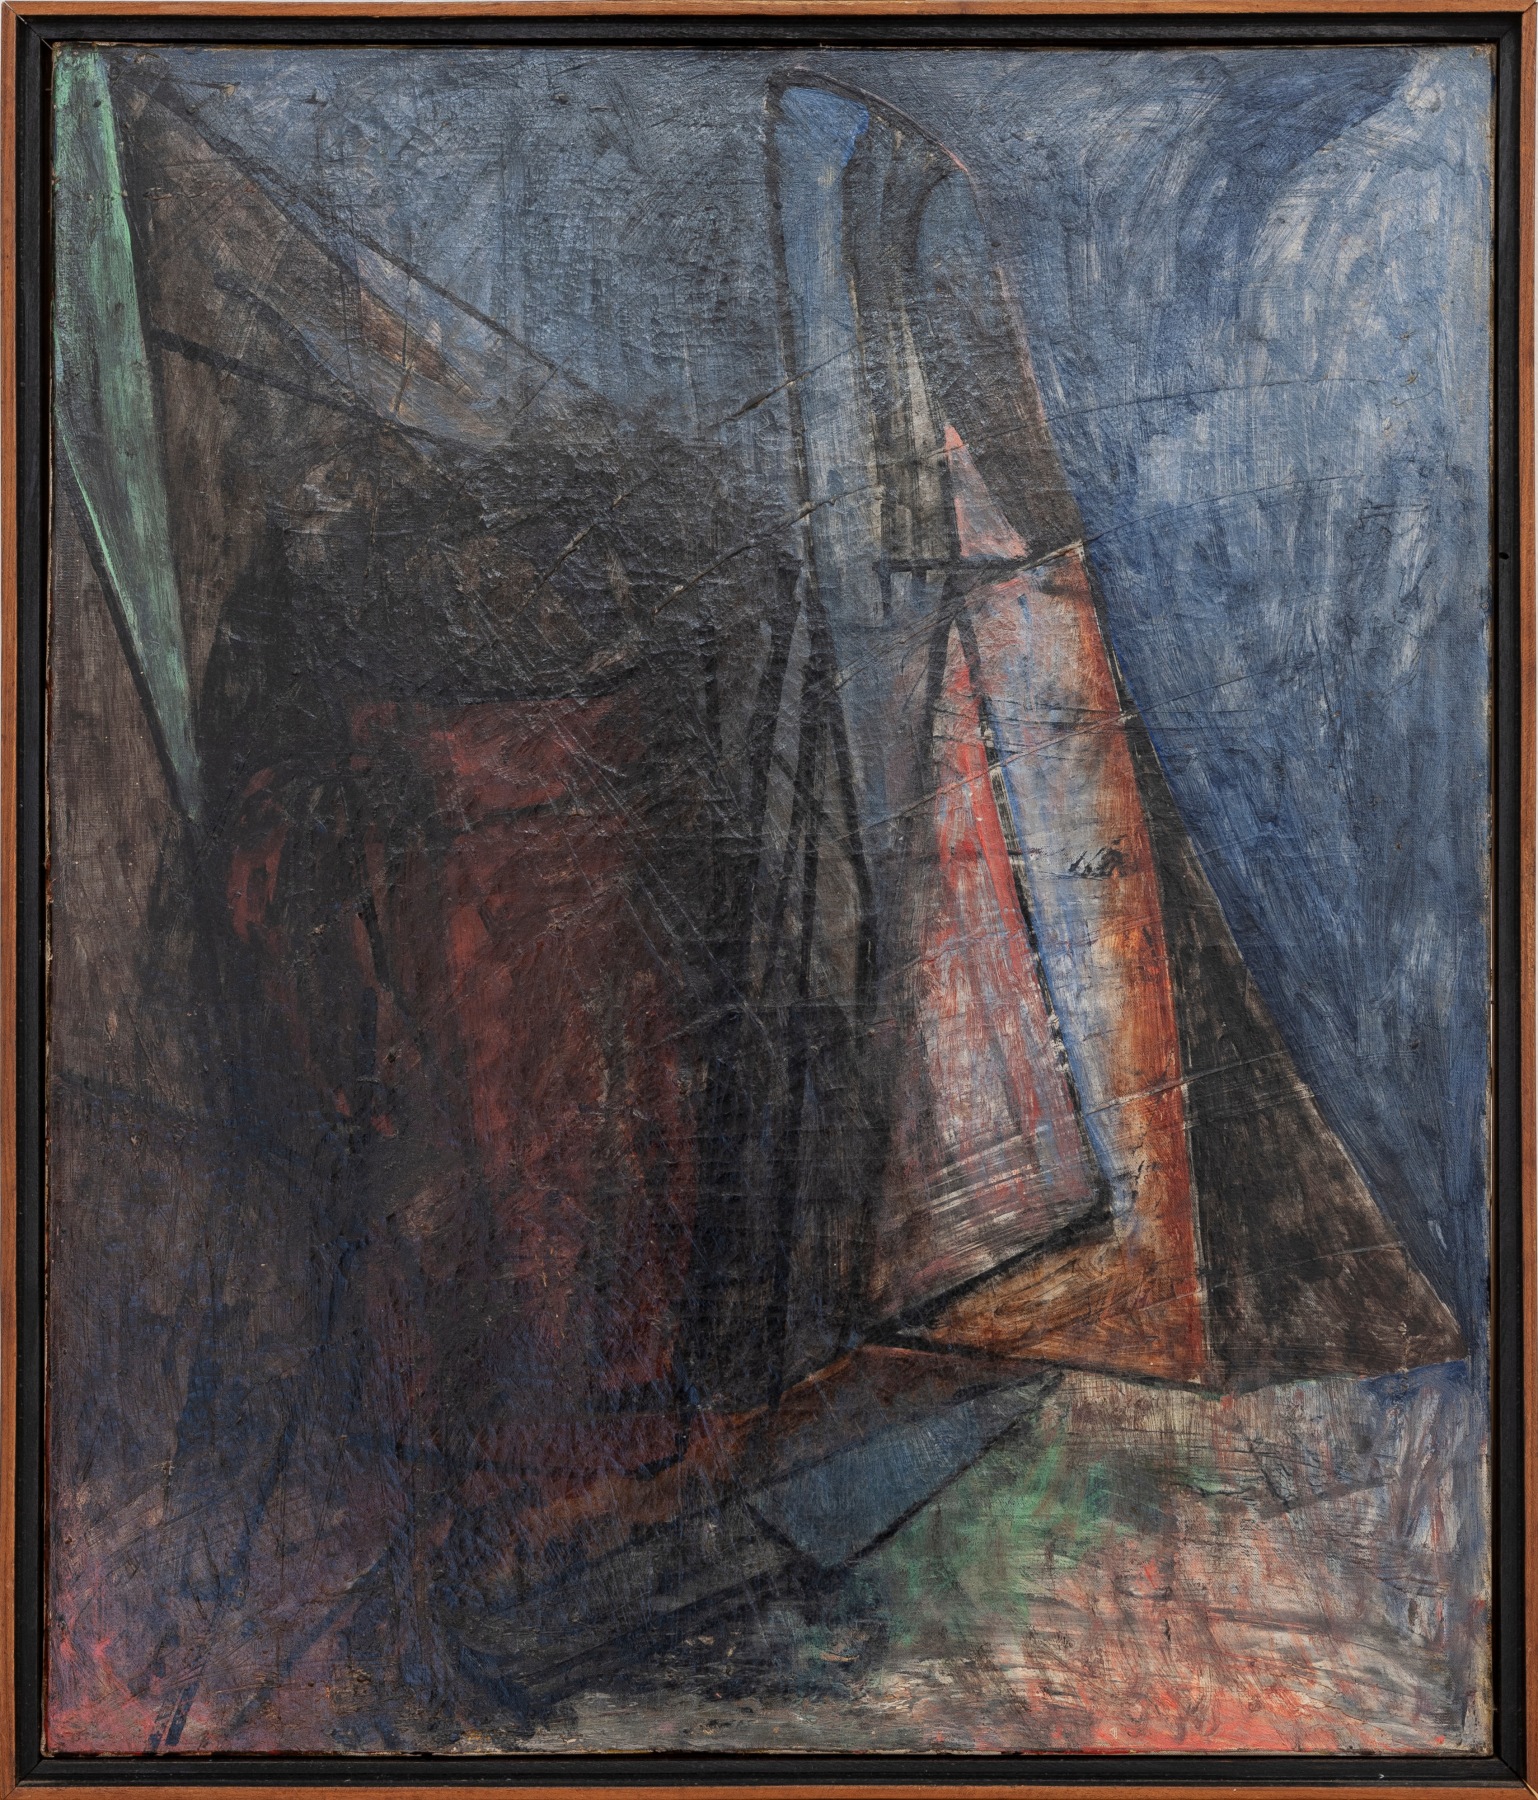 Alejadro Otero,&nbsp;Sin T&iacute;tulo [La hachuela] from the series &quot;Cafeteras,&quot;&nbsp;1947,&nbsp;Oil on canvas,&nbsp;25 7/16 x 21 3/8 in. (64.7 x 54.3 cm.)